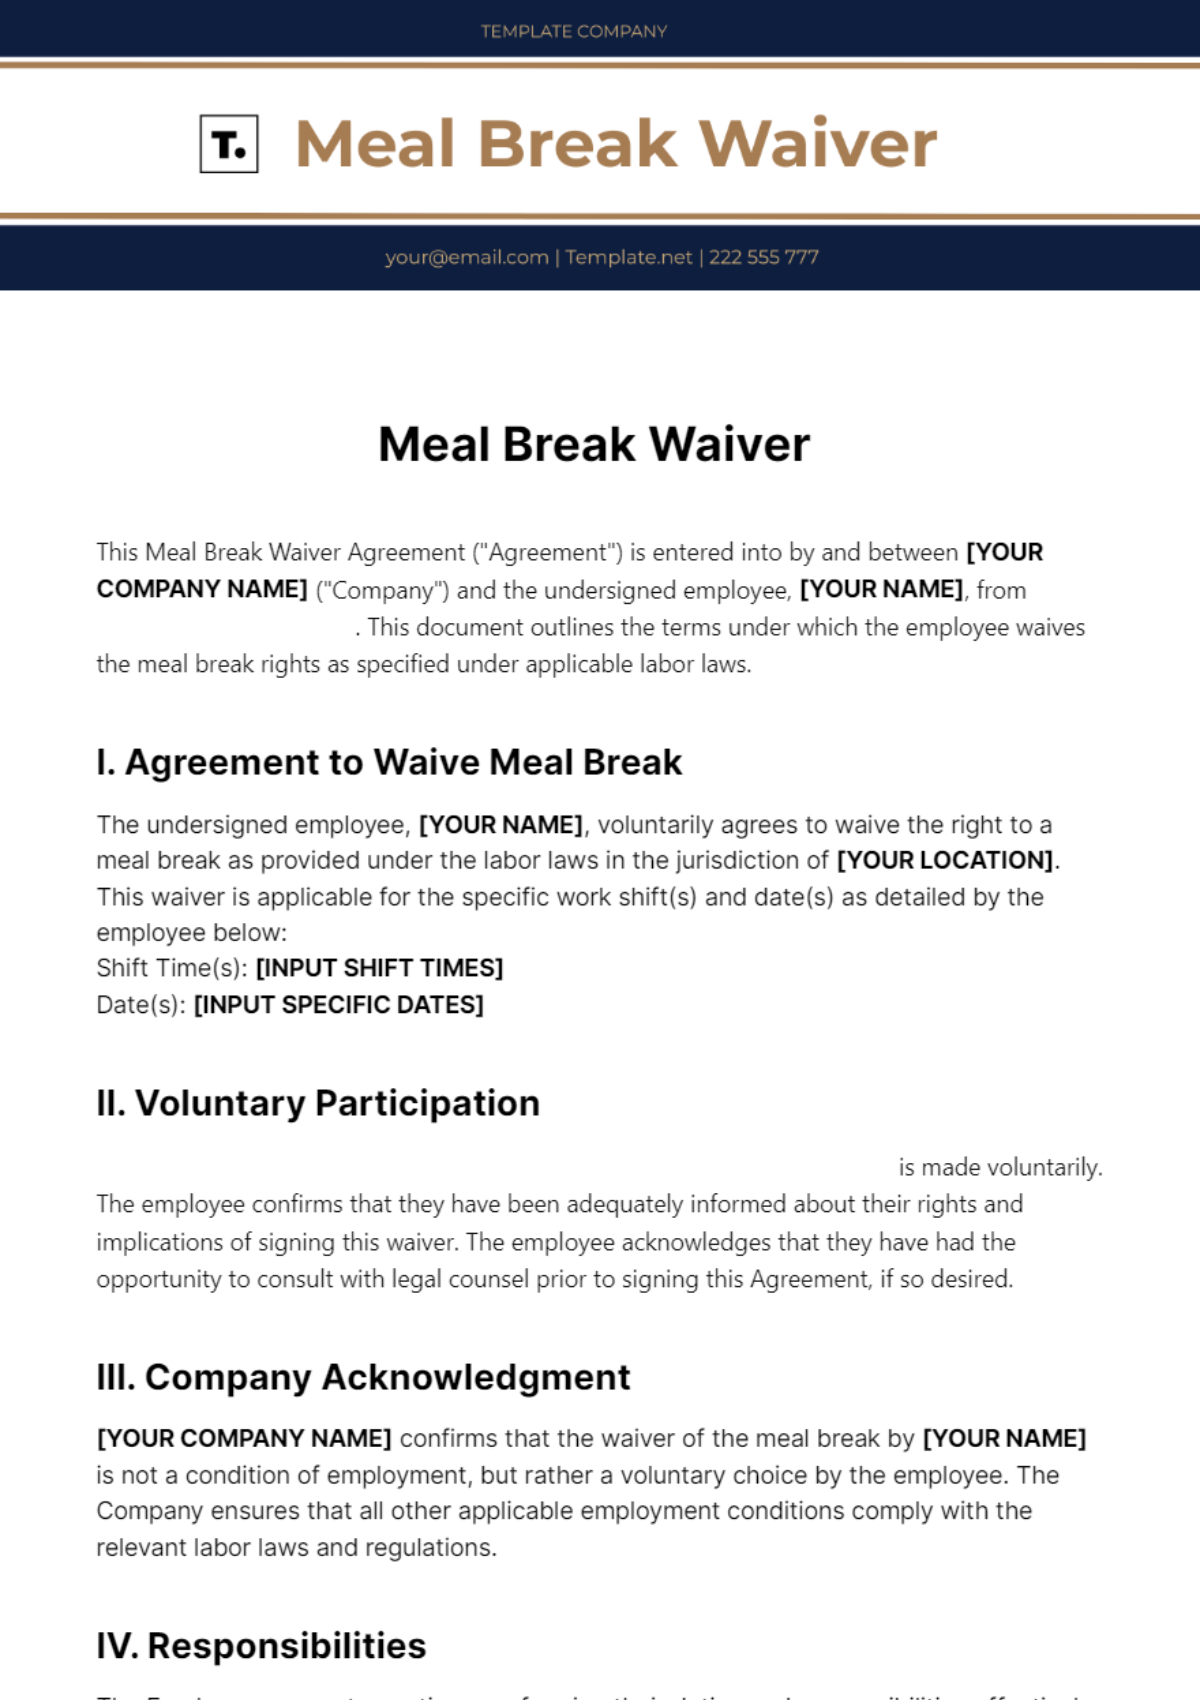 Free Meal Break Waiver Template